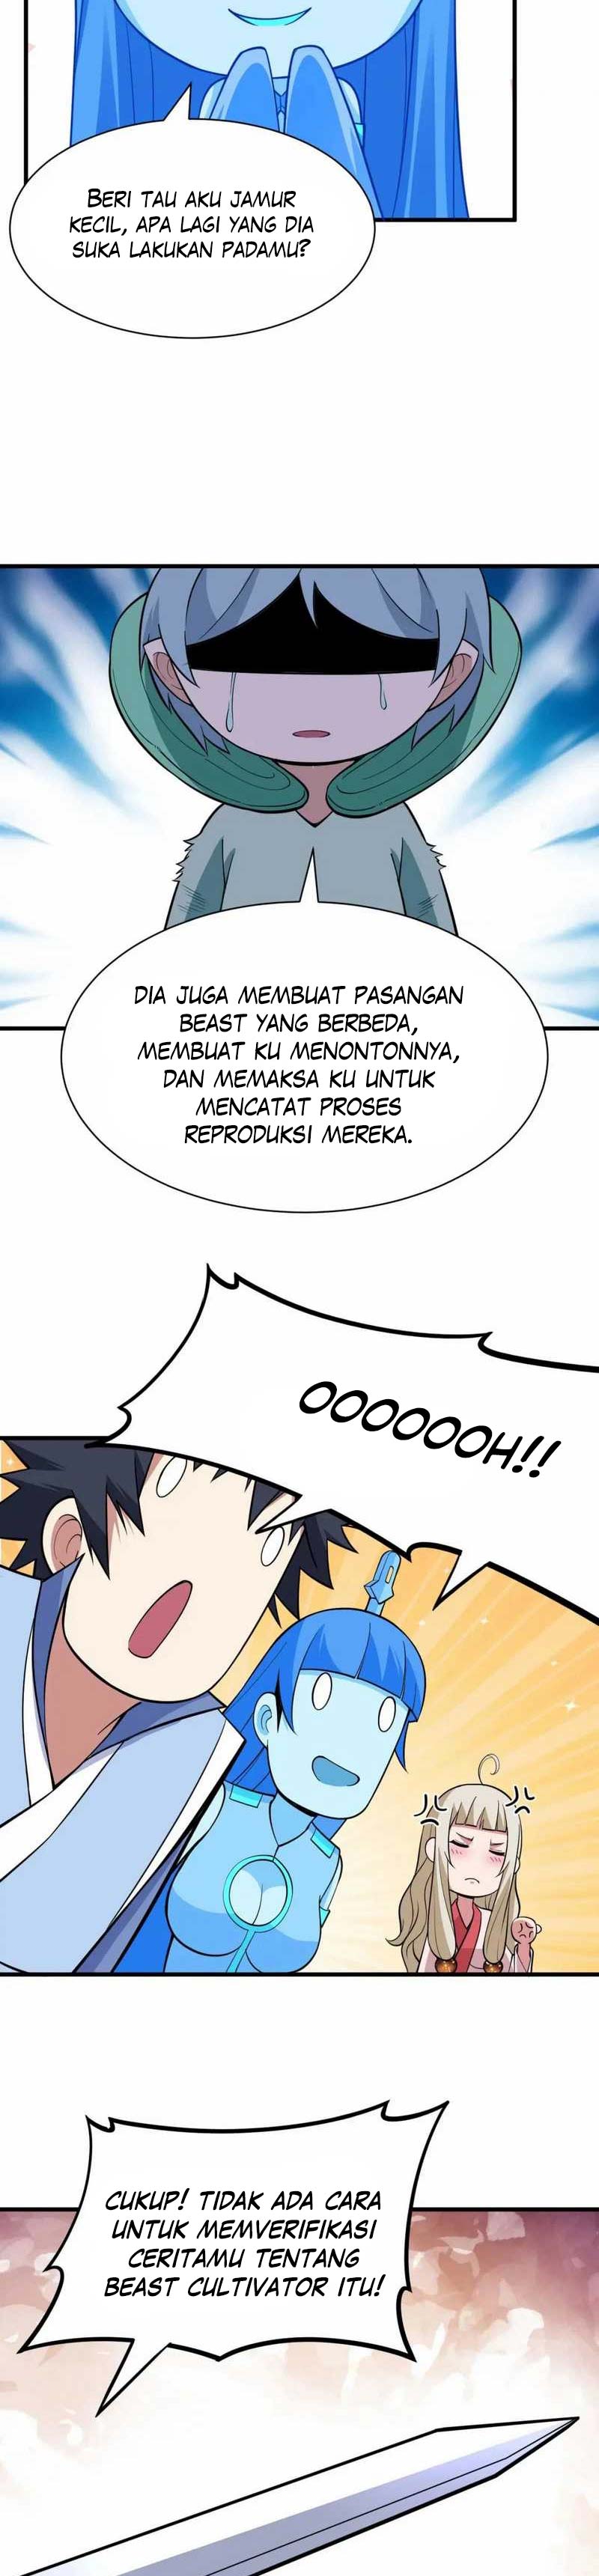 Dilarang COPAS - situs resmi www.mangacanblog.com - Komik i just want to be beaten to death by everyone 116 - chapter 116 117 Indonesia i just want to be beaten to death by everyone 116 - chapter 116 Terbaru 9|Baca Manga Komik Indonesia|Mangacan